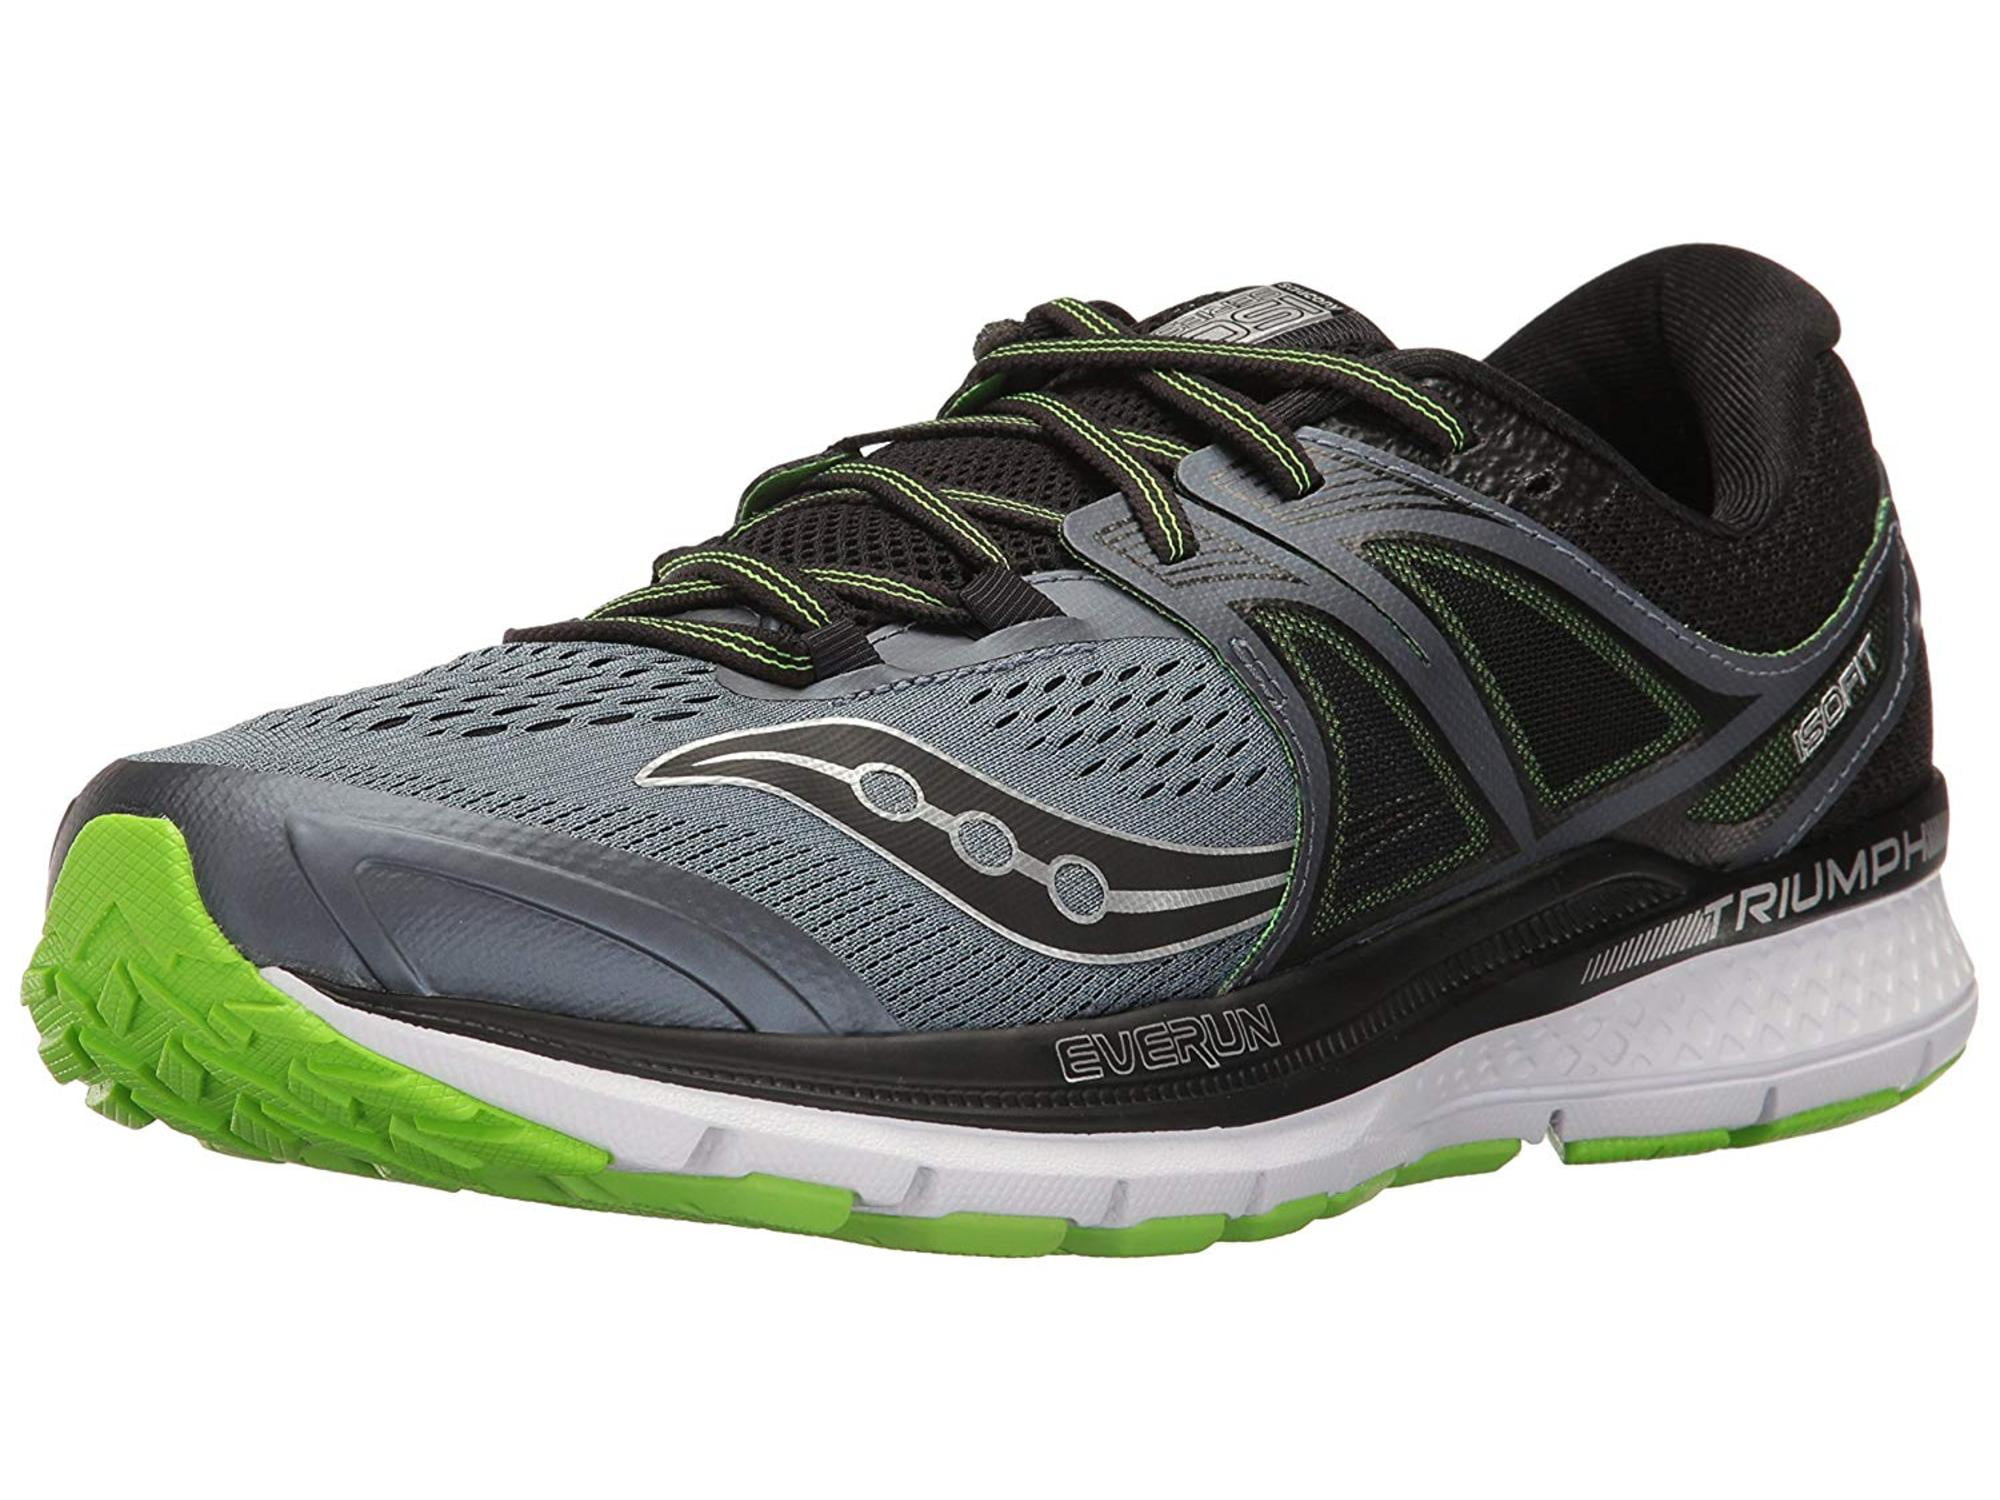 shoes like saucony triumph iso 3